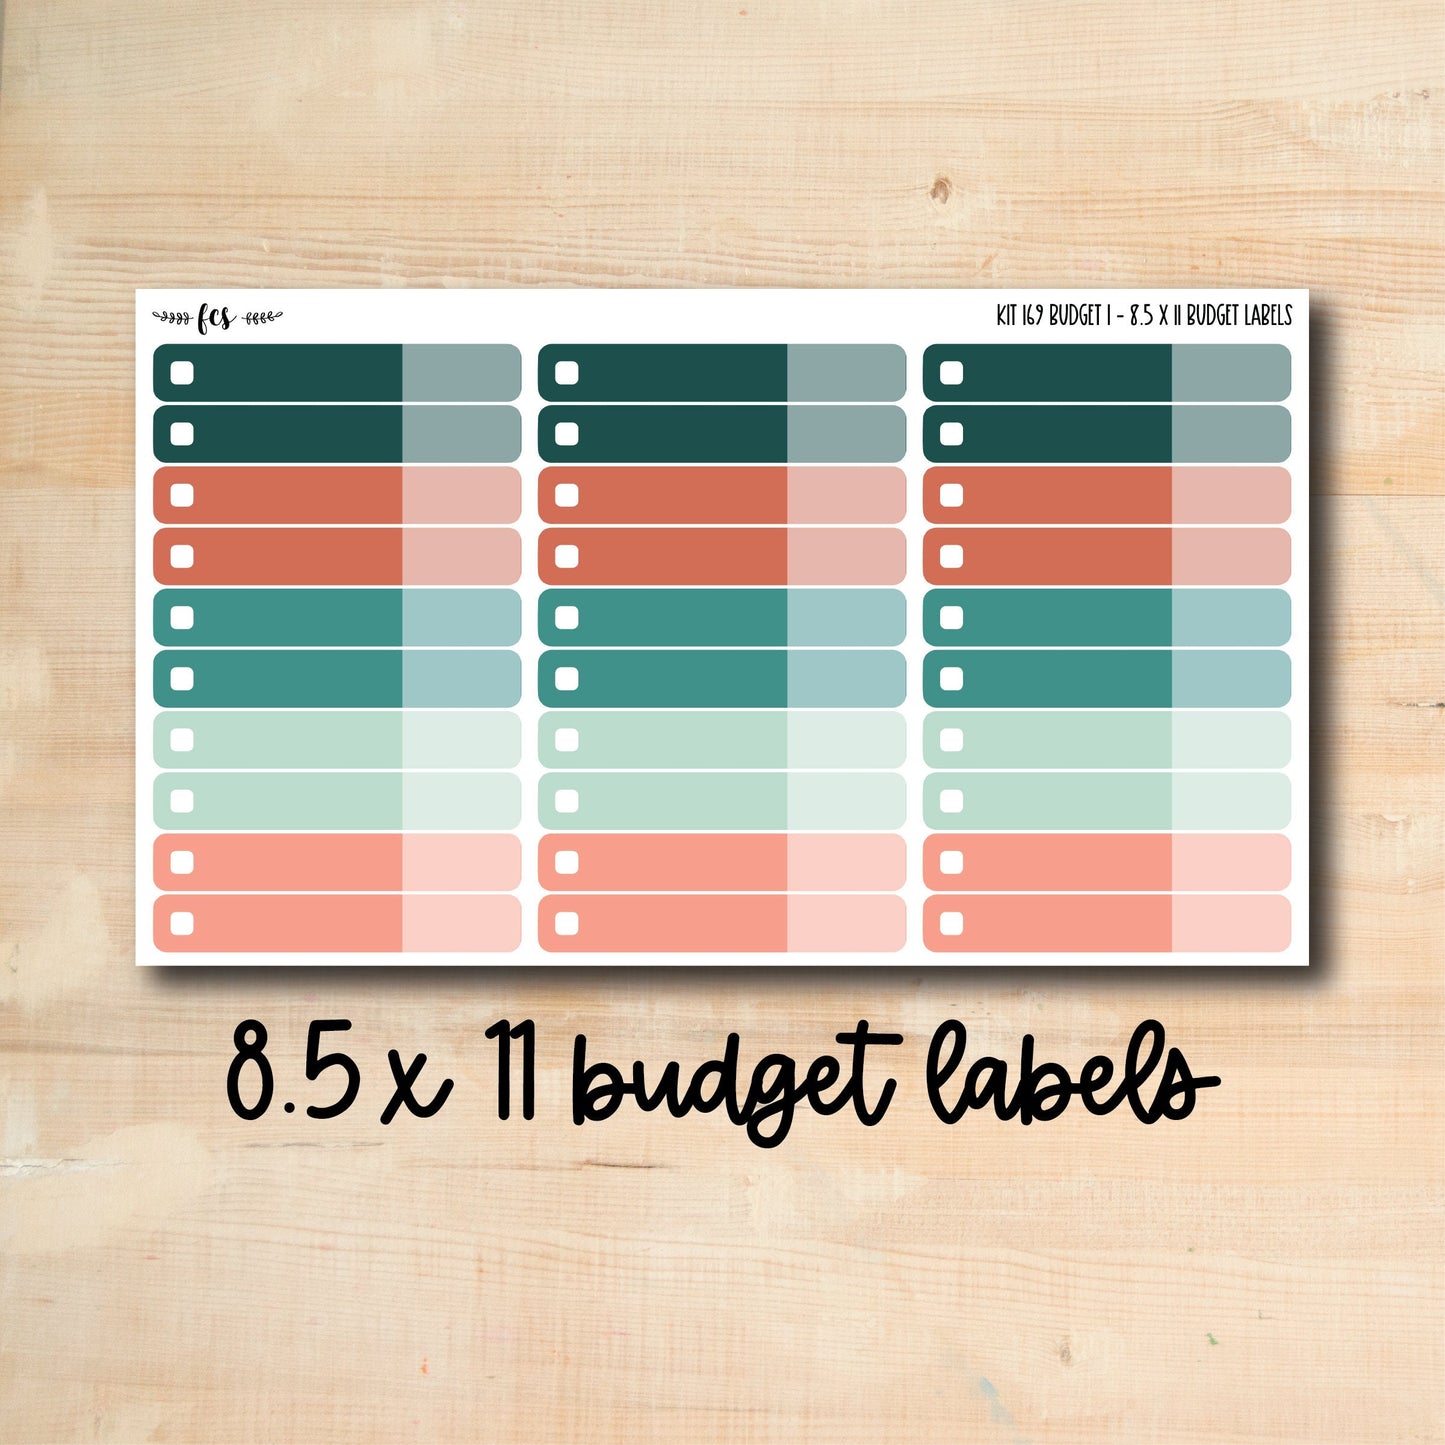 BUDGET-169 || TROPICAL LEAVES 8.5x11 budget labels